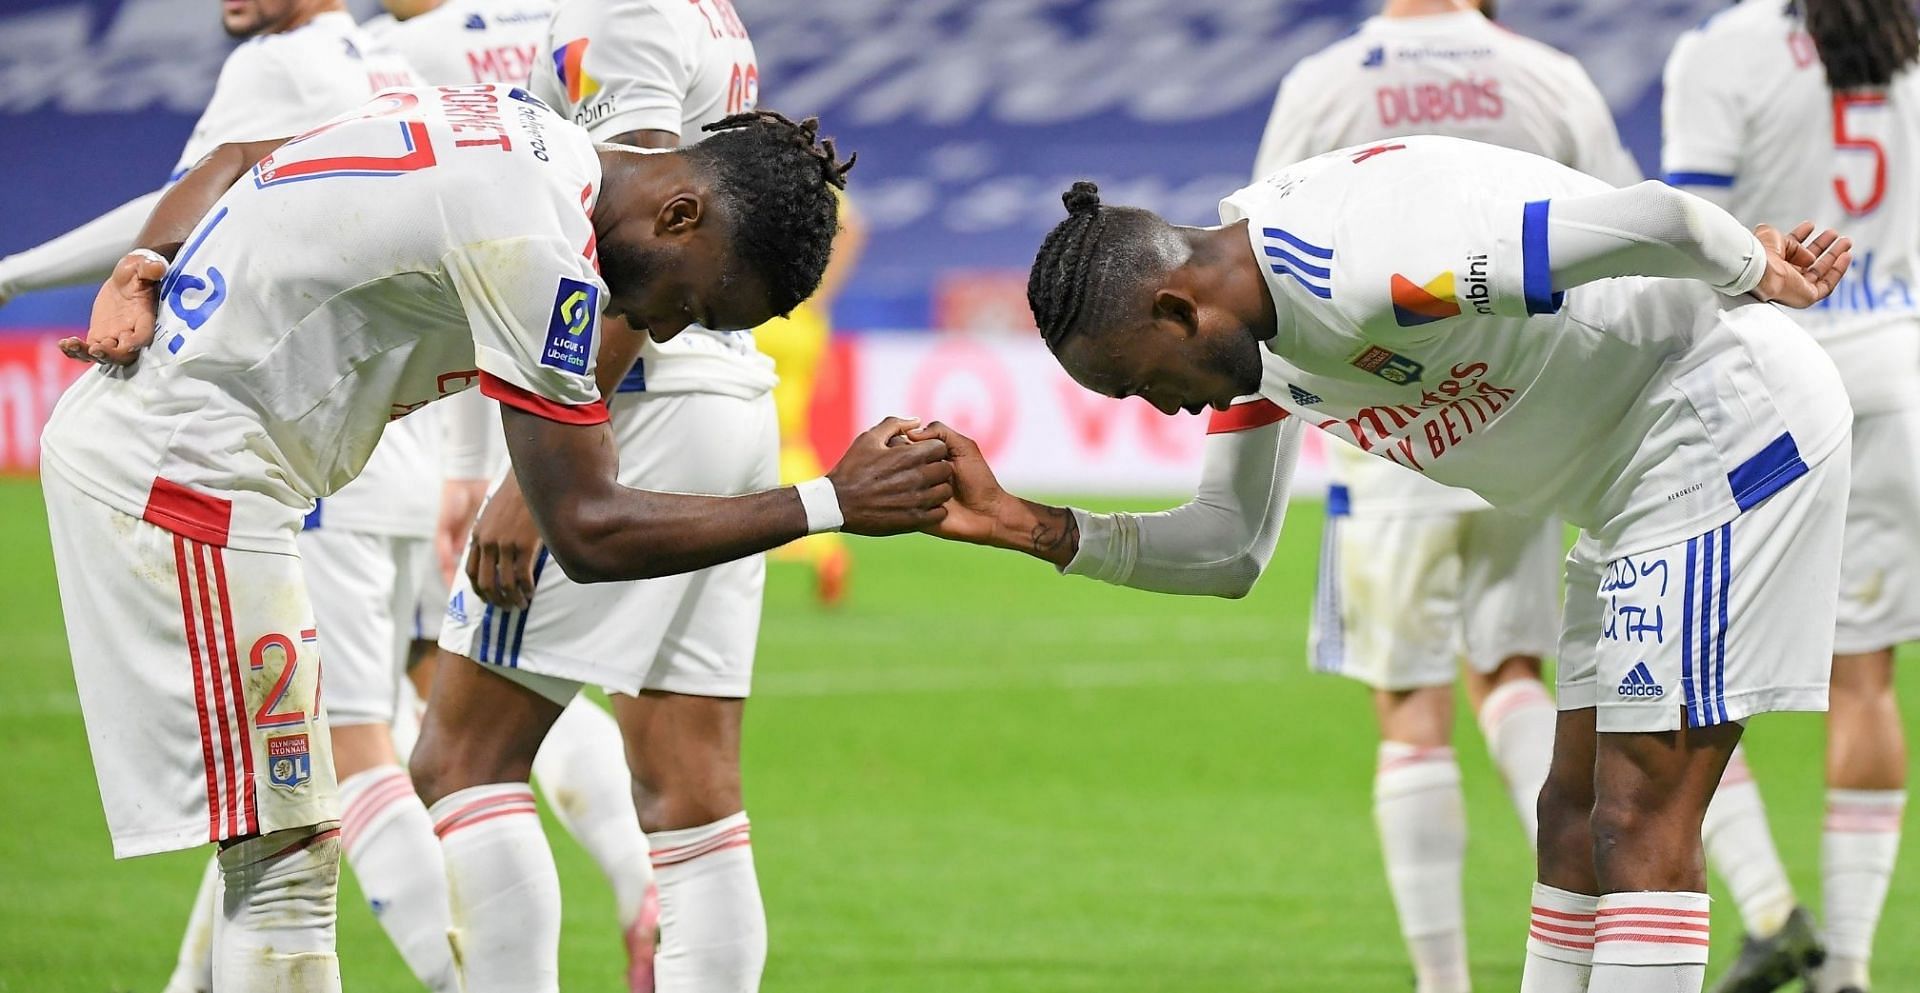 Lyon will meet Lorient in Ligue 1 on Saturday